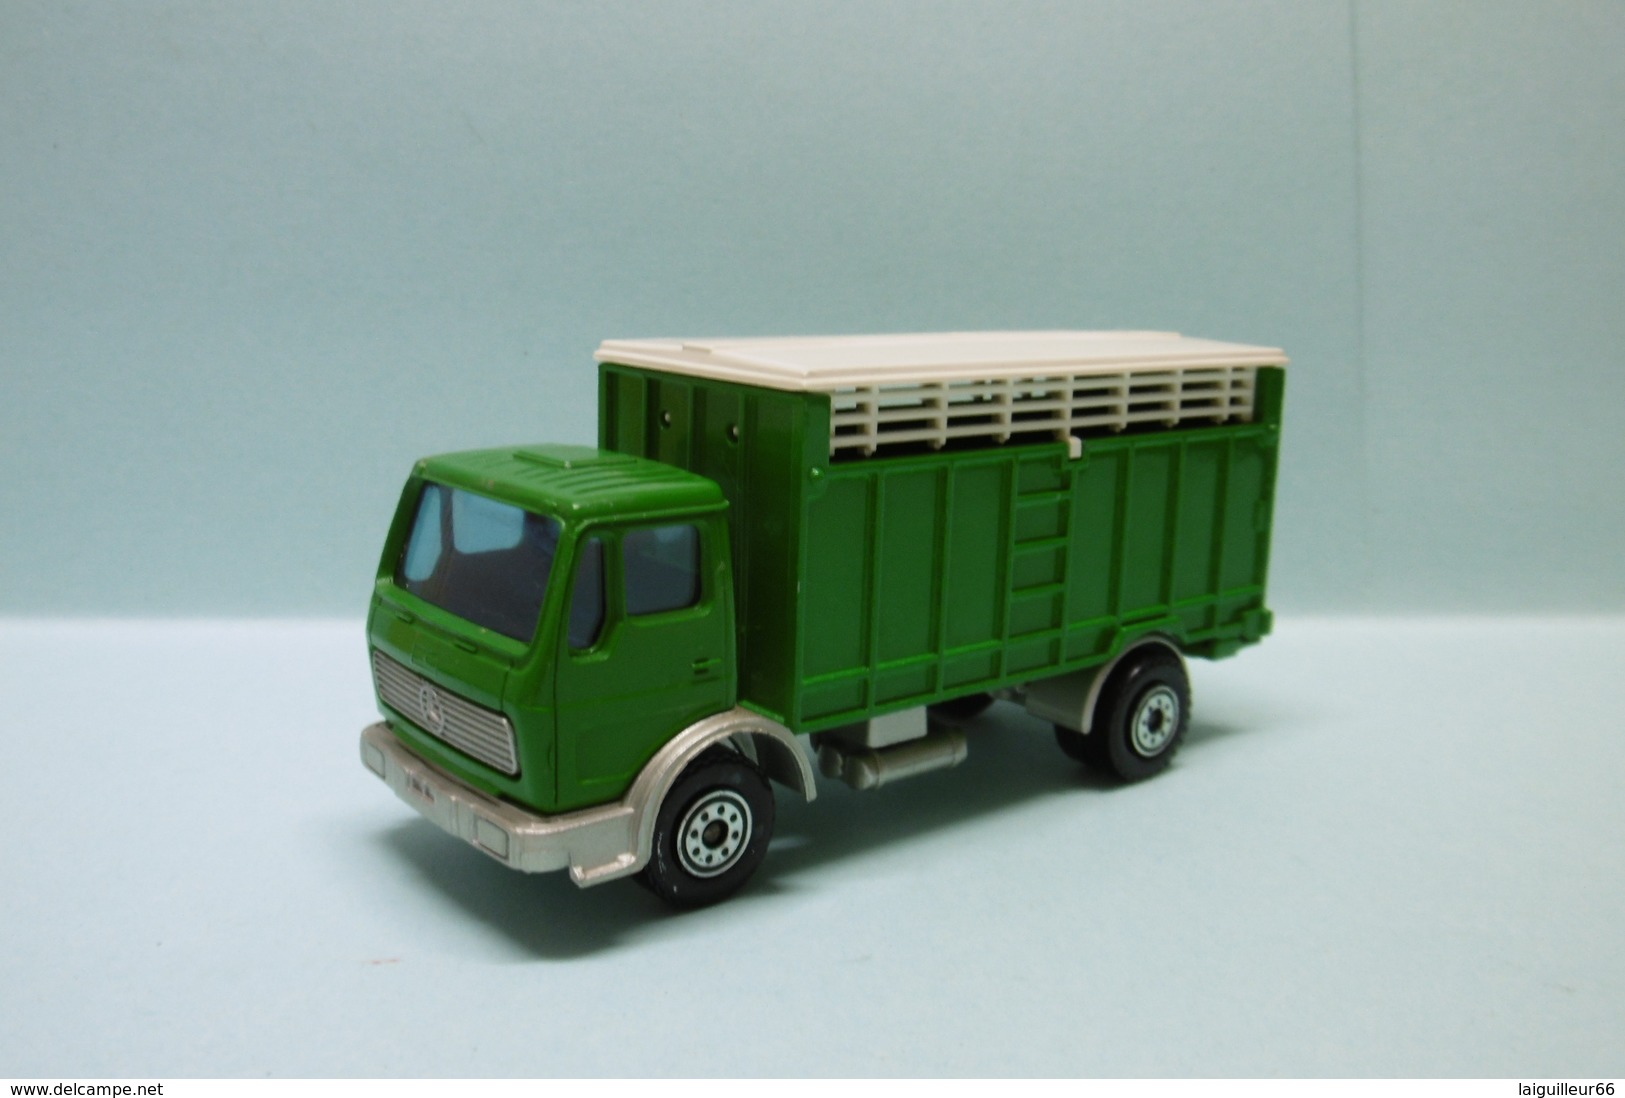 Solido - CAMION BETAILLIERE MERCEDES 1217 K/32 Réf. 373 1/55 - Trucks, Buses & Construction